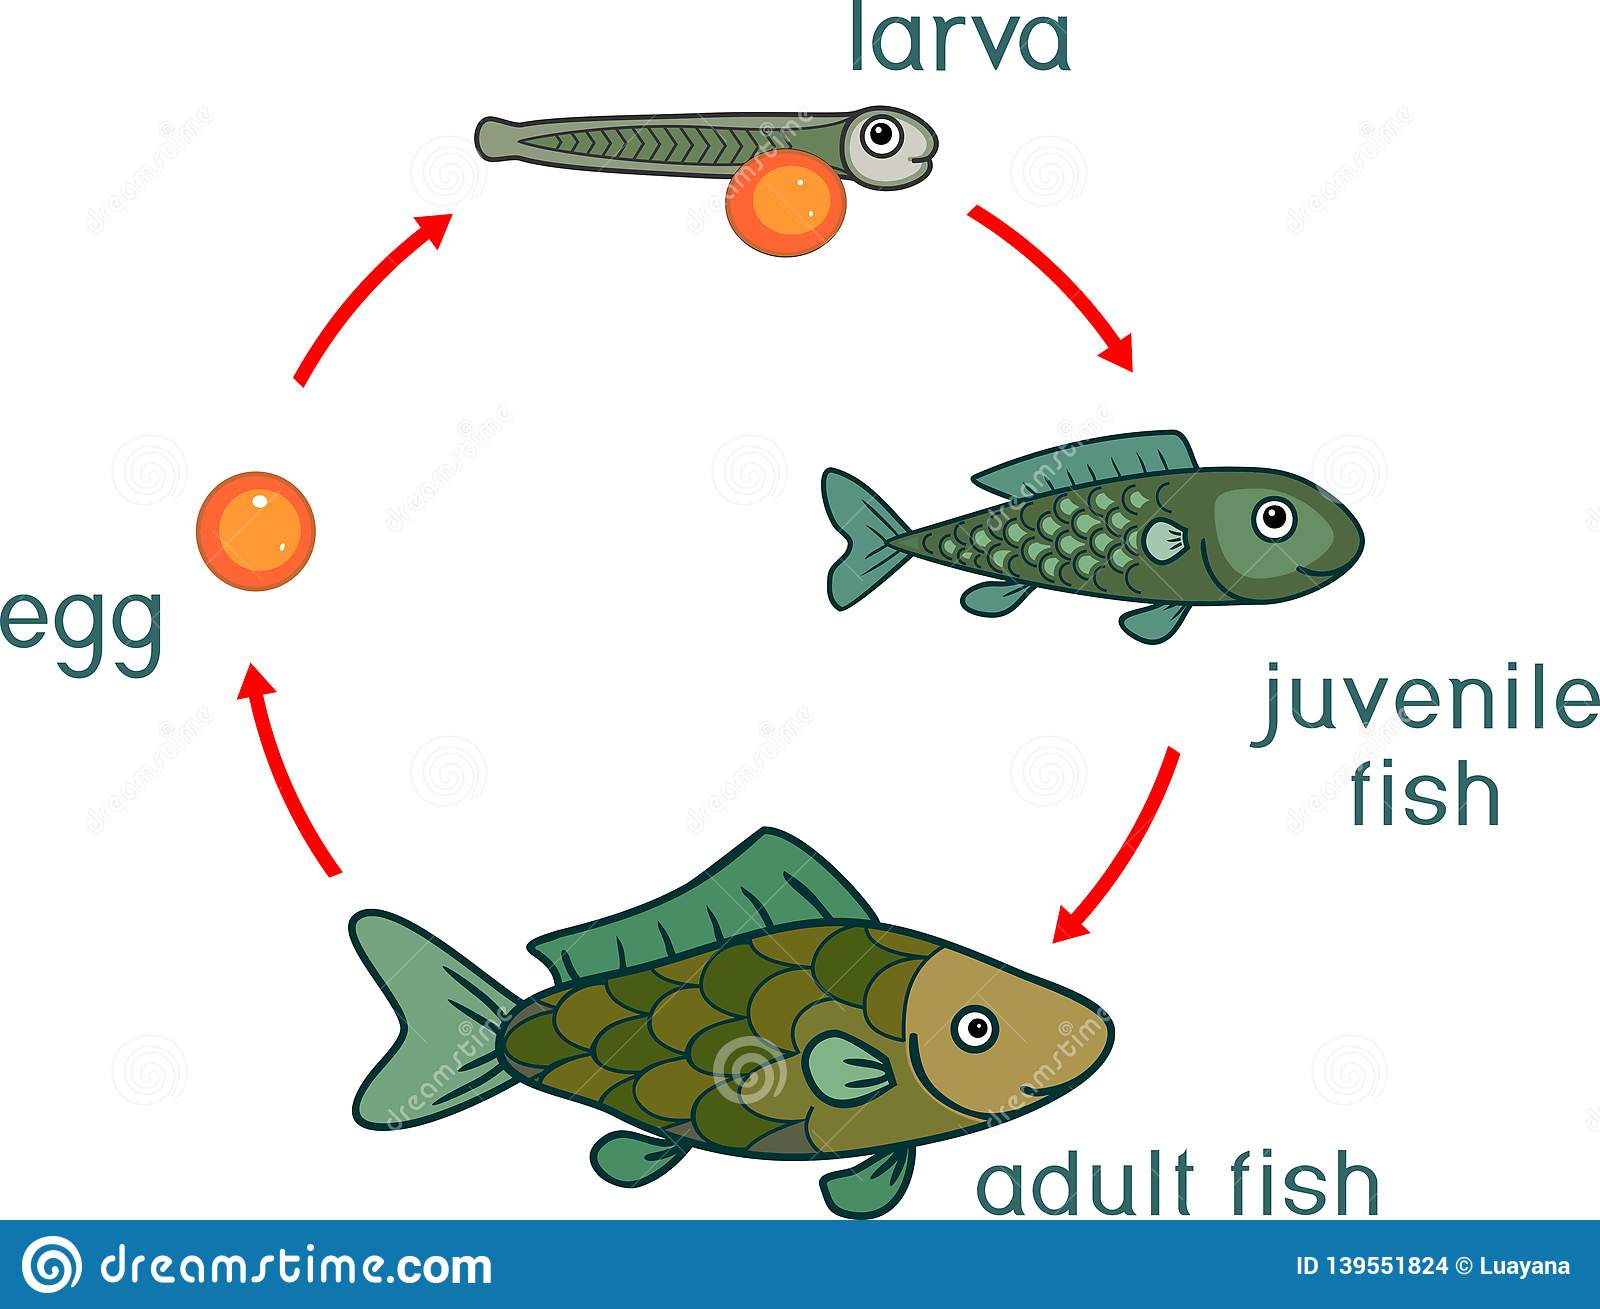 What is the life cycle of the fish?